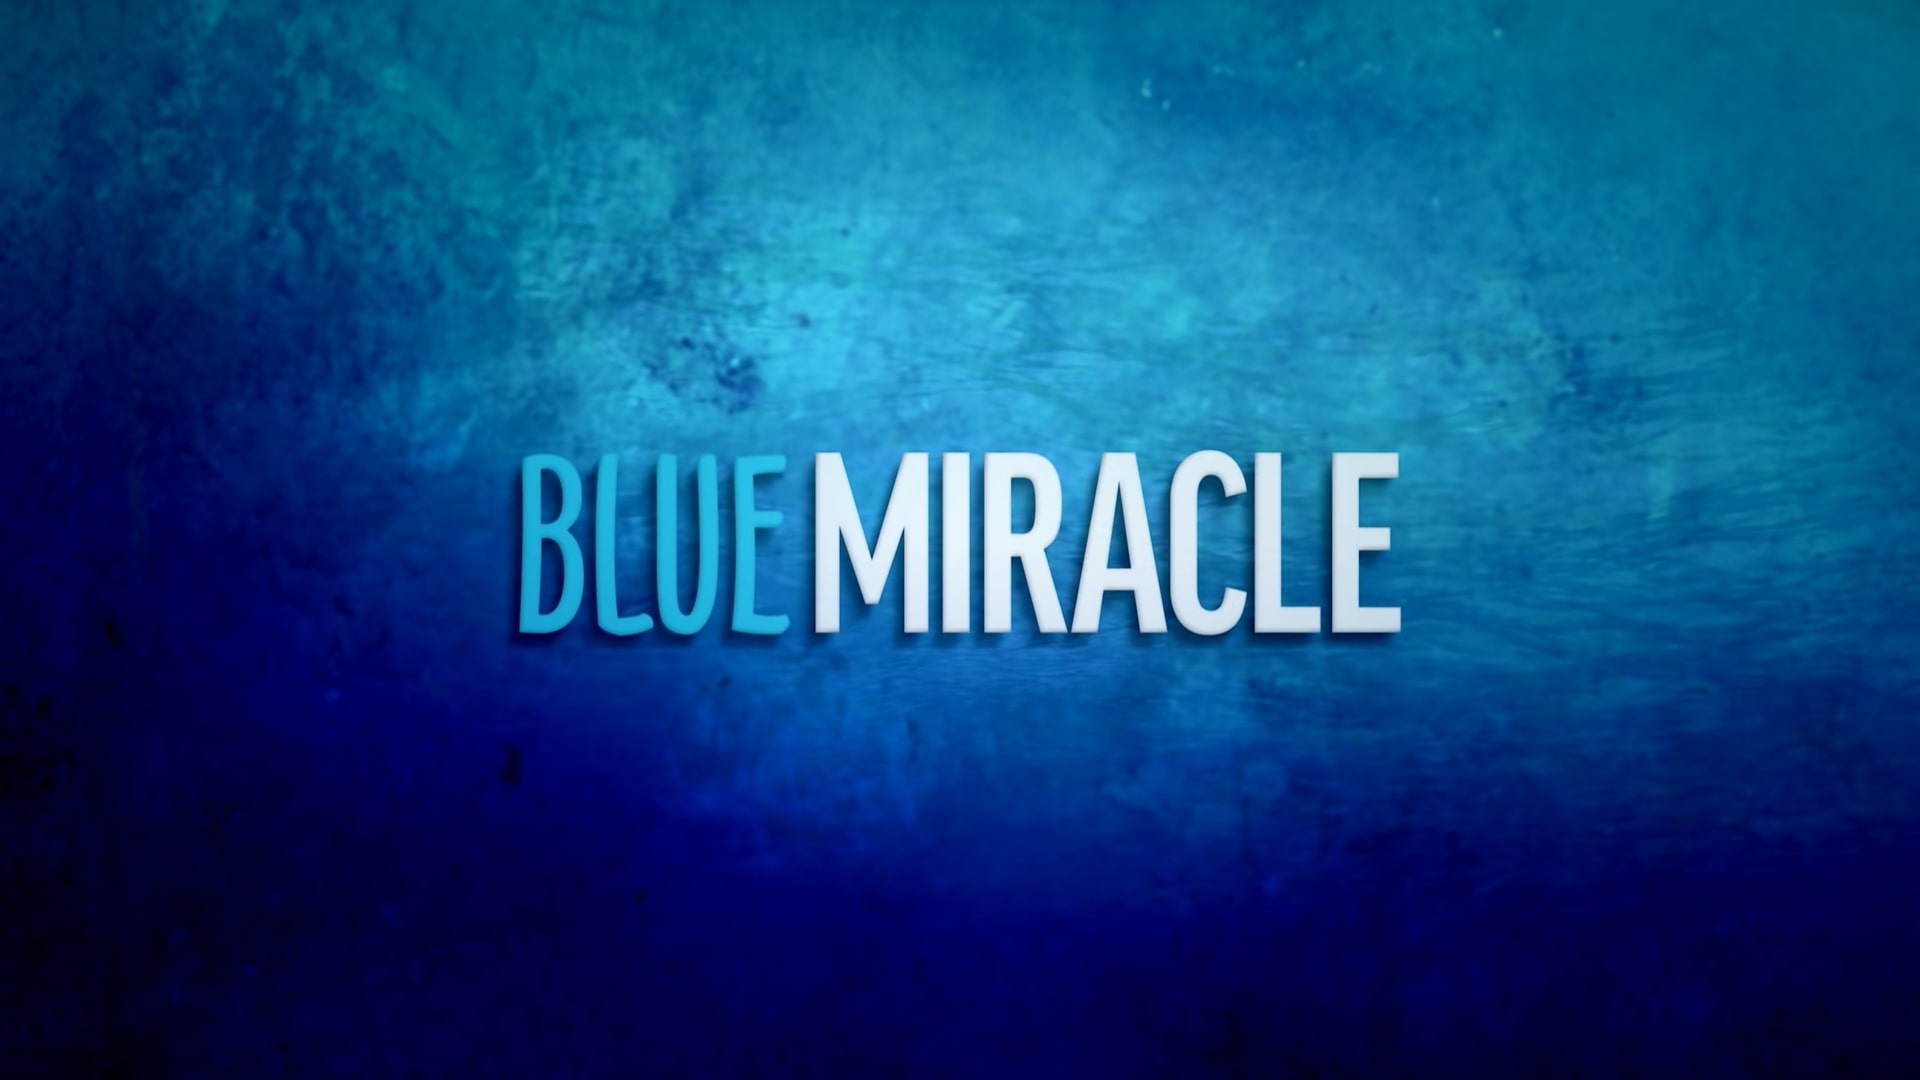 Netflix Blue Miracle Trailer, Biographical Movies, Coming to Netflix in May 2021